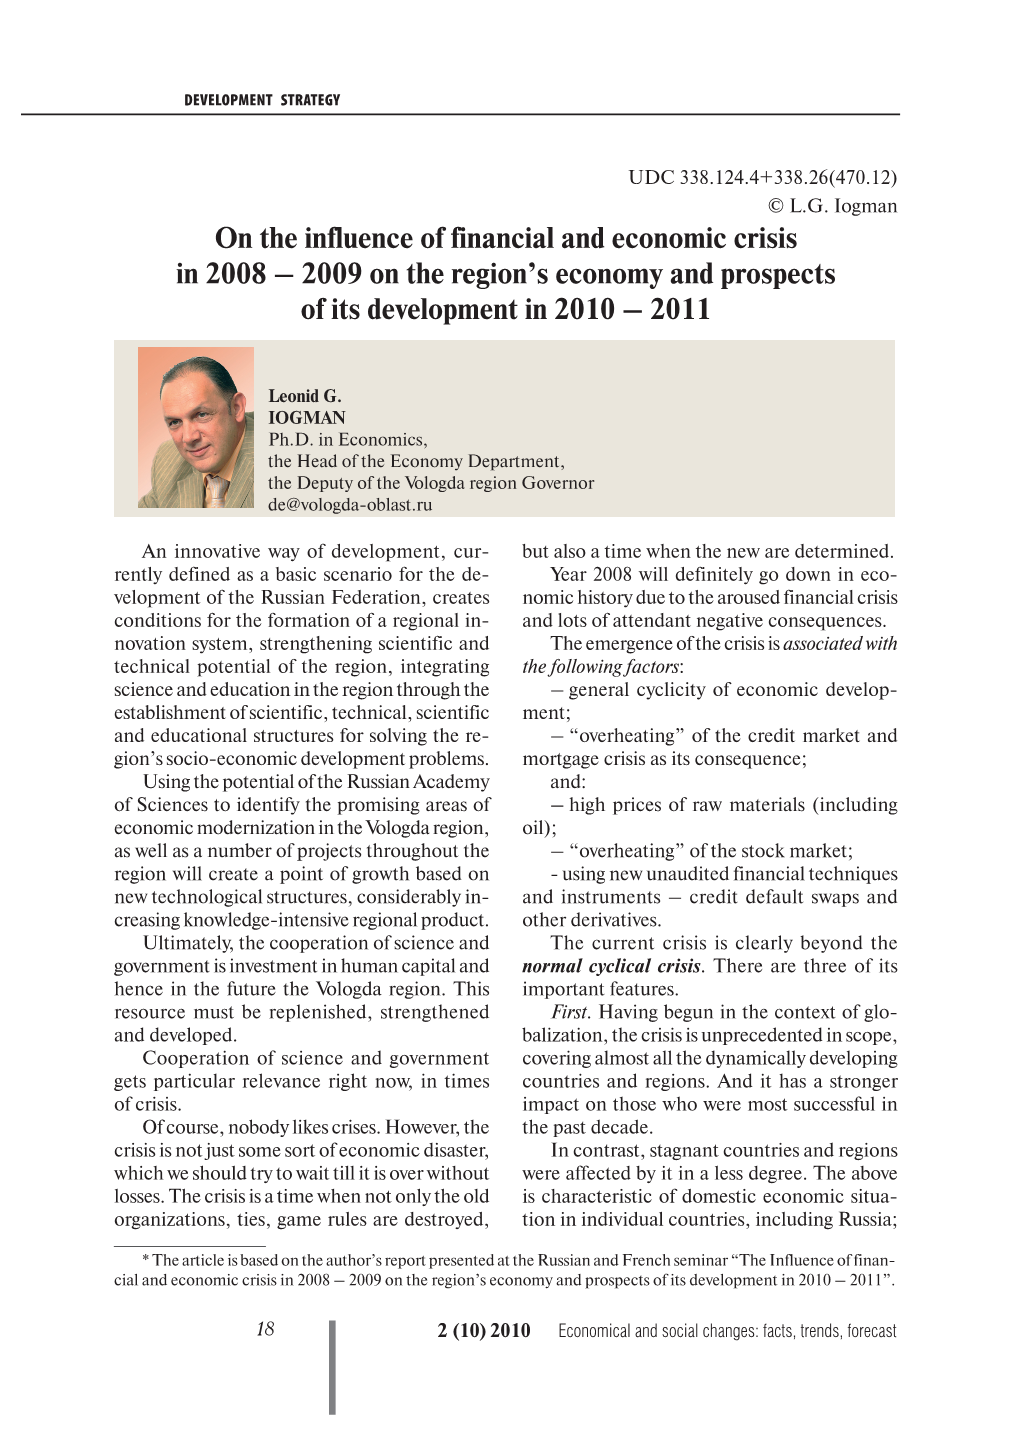 On the Influence of Financial and Economic Crisis in 2008 – 2009 on the Region’S Economy and Prospects of Its Development in 2010 – 2011